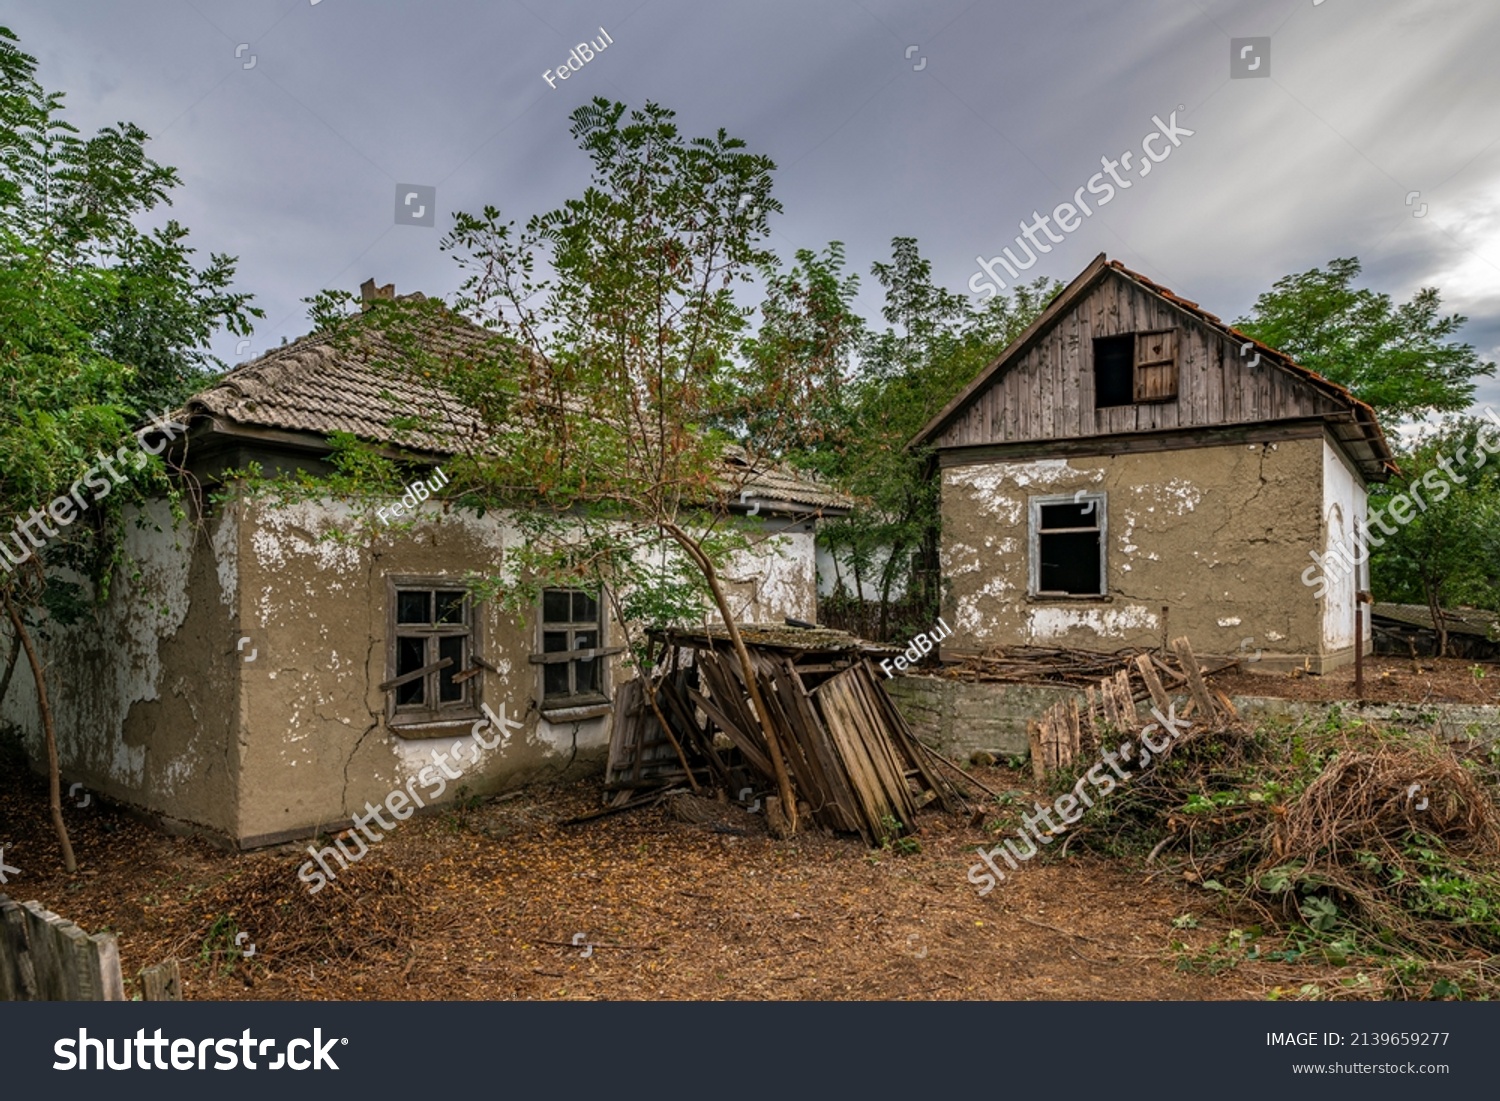 Old abandoned ruined house in dead village. Deserted and destroyed dwelling on farm yard. Neglected building countryside #2139659277